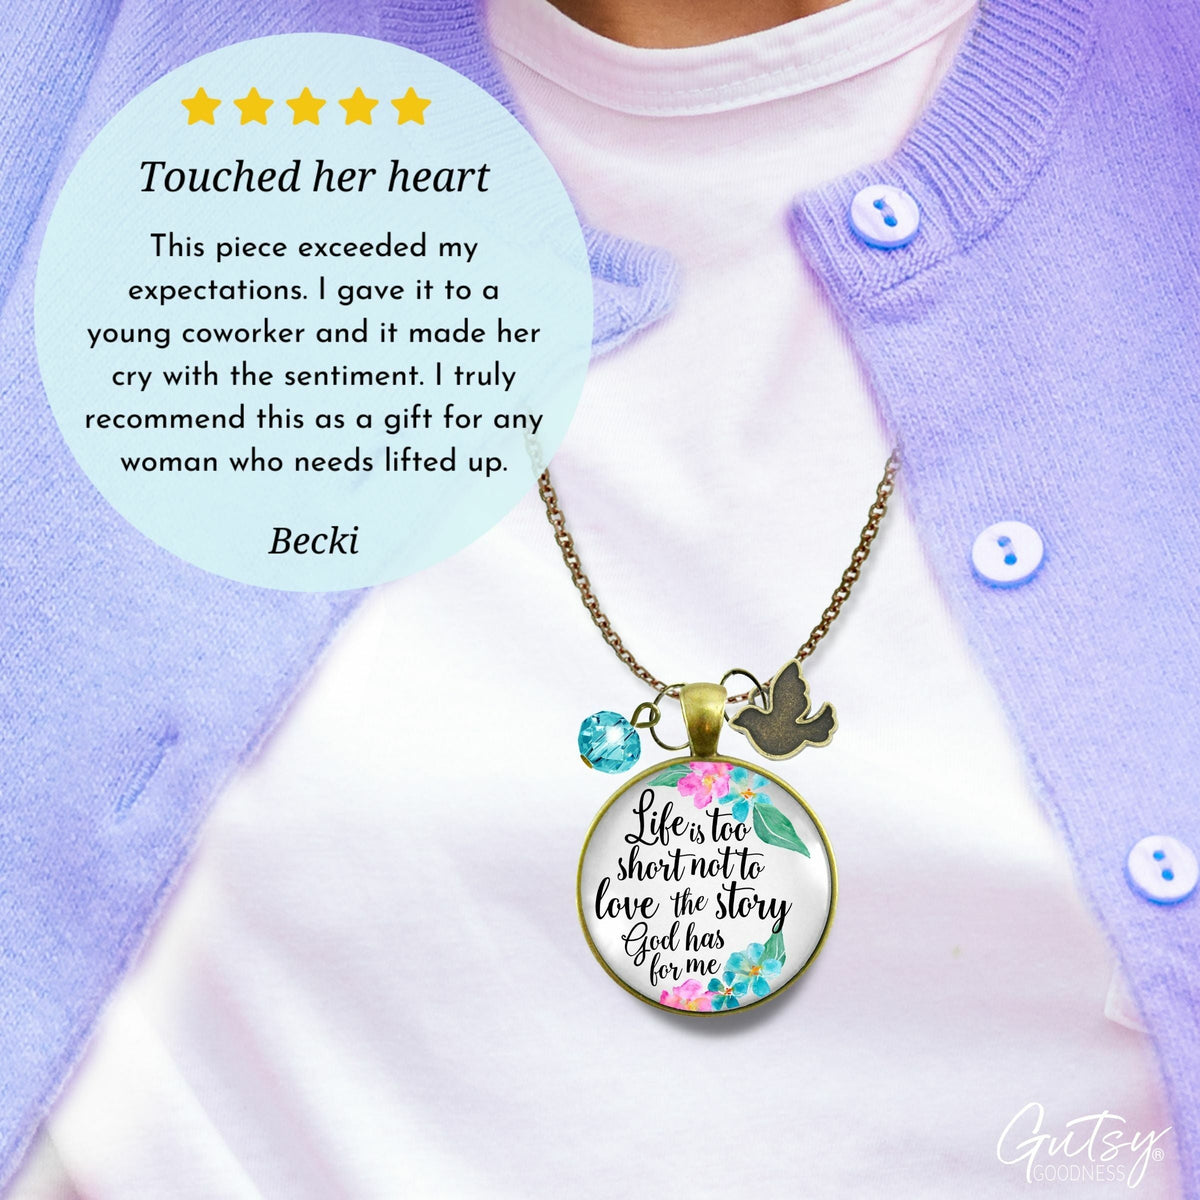 Gutsy Goodness Faith Necklace Life is Too Short Not To Love The Story God Has For Me - Gutsy Goodness;Faith Necklace Life Is Too Short Not To Love The Story God Has For Me - Gutsy Goodness Handmade Jewelry Gifts